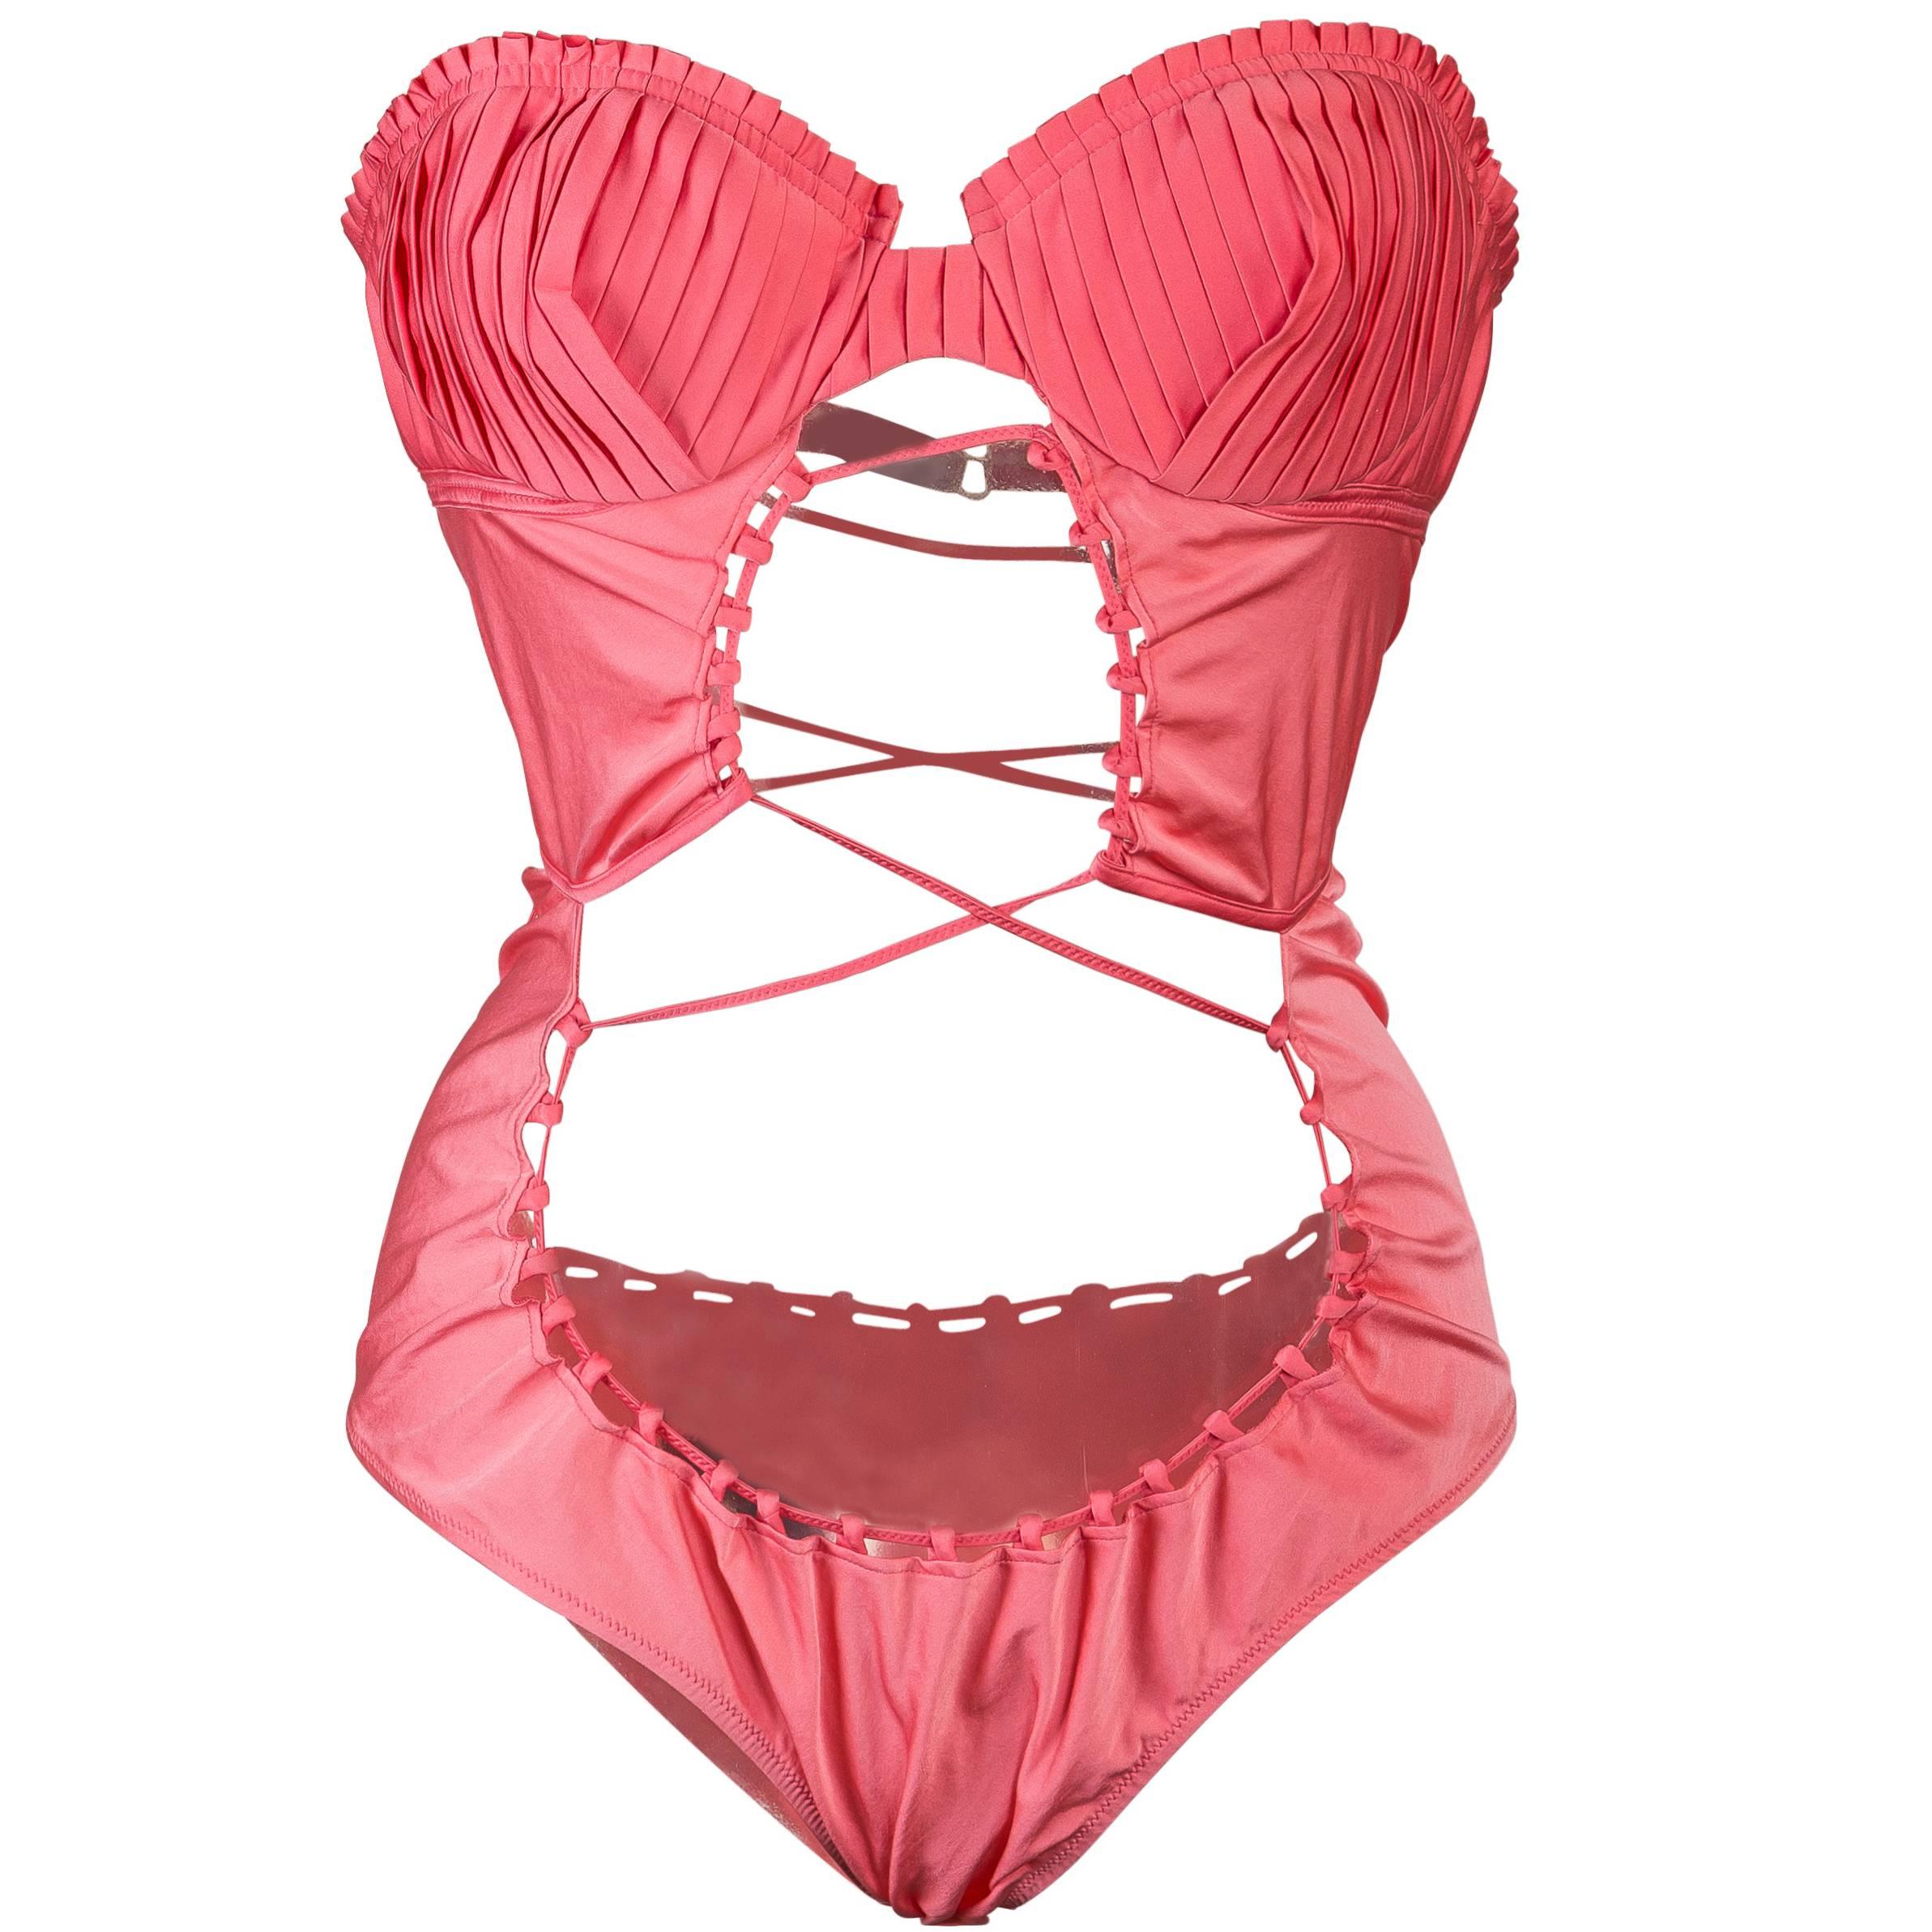 Tom Ford for Gucci S/S 2004 Pink Pleated Swimsuit For Sale